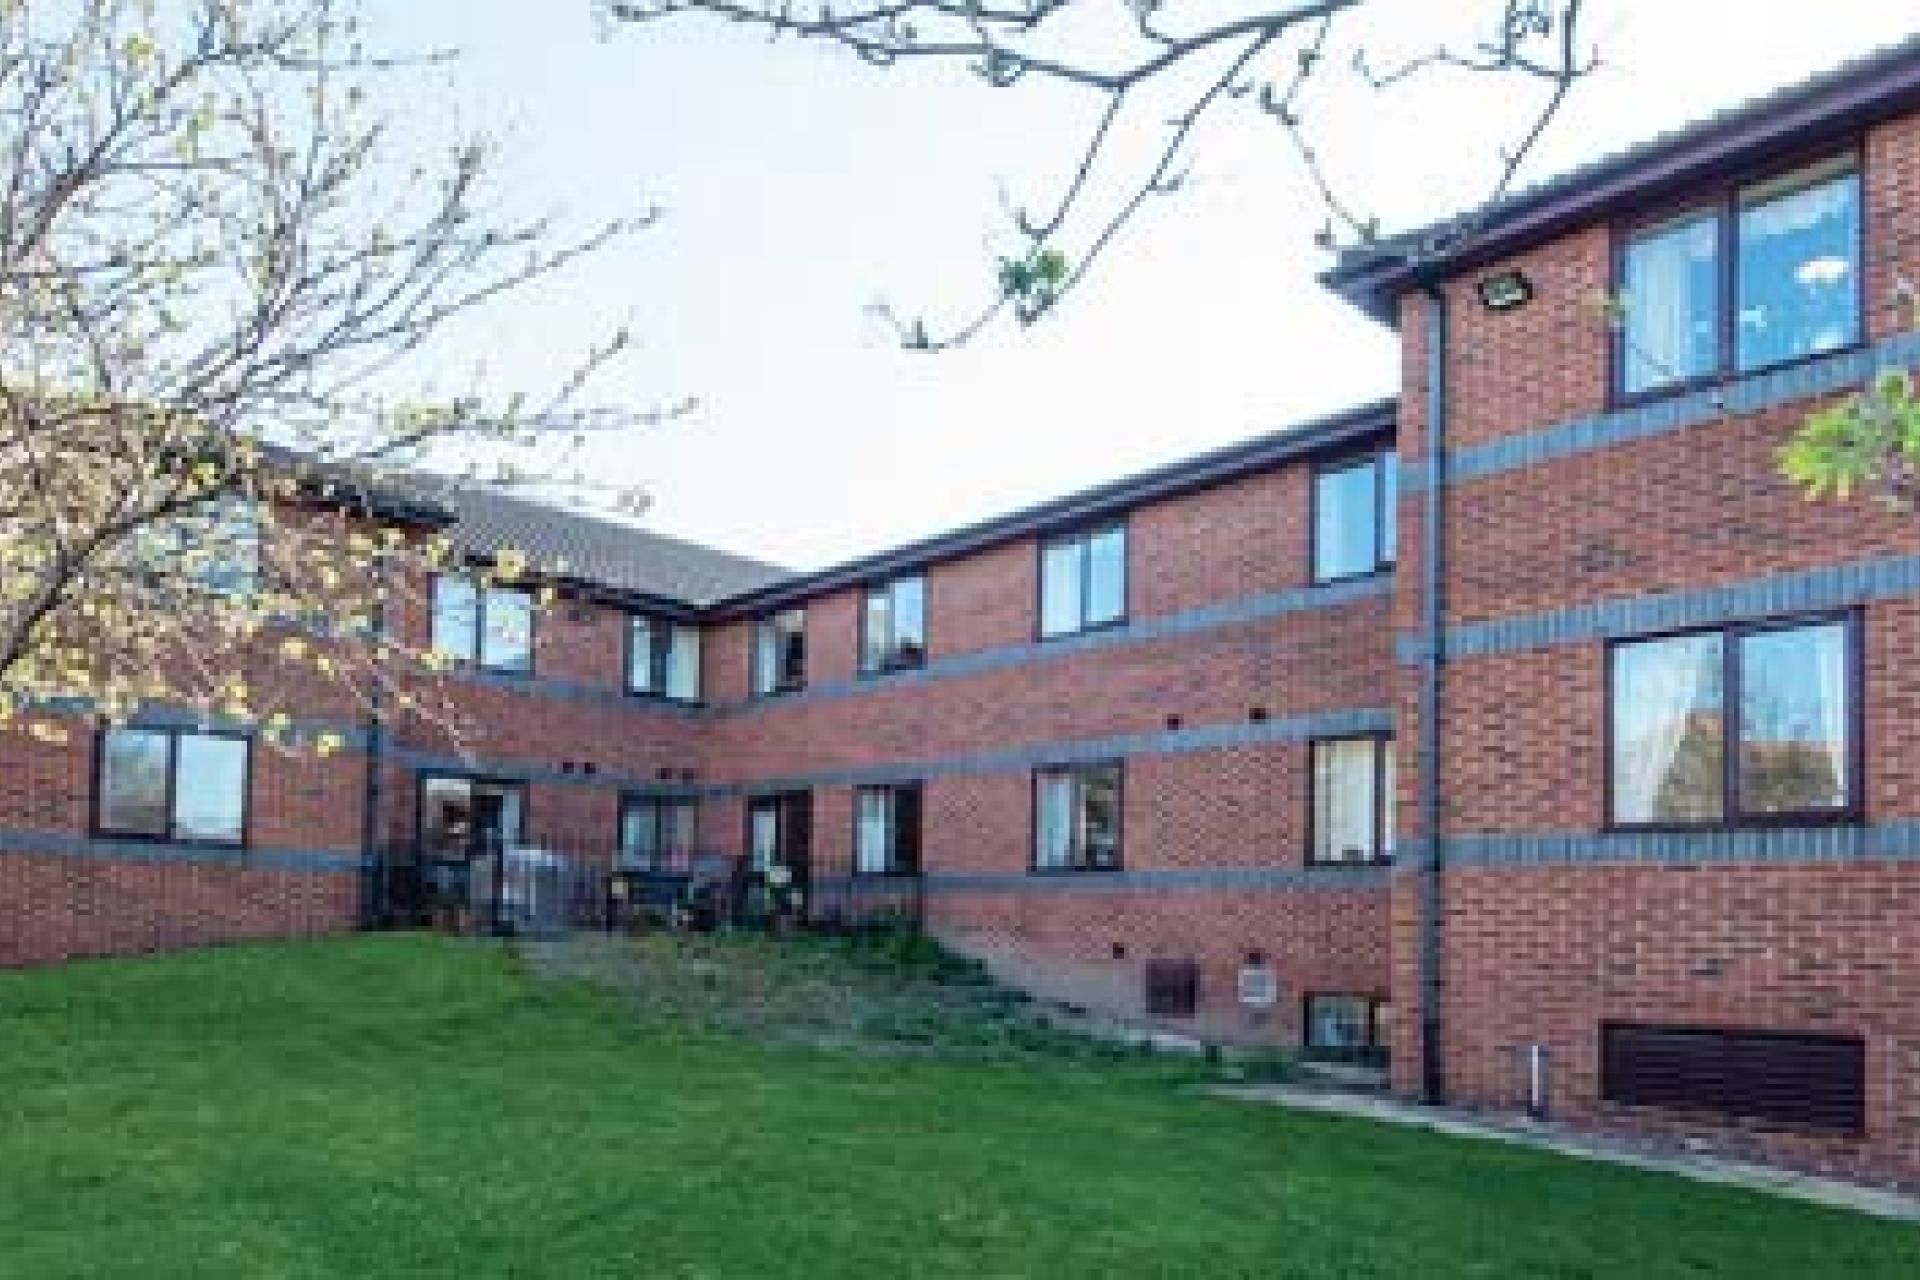 ashlea mews care home in south shields